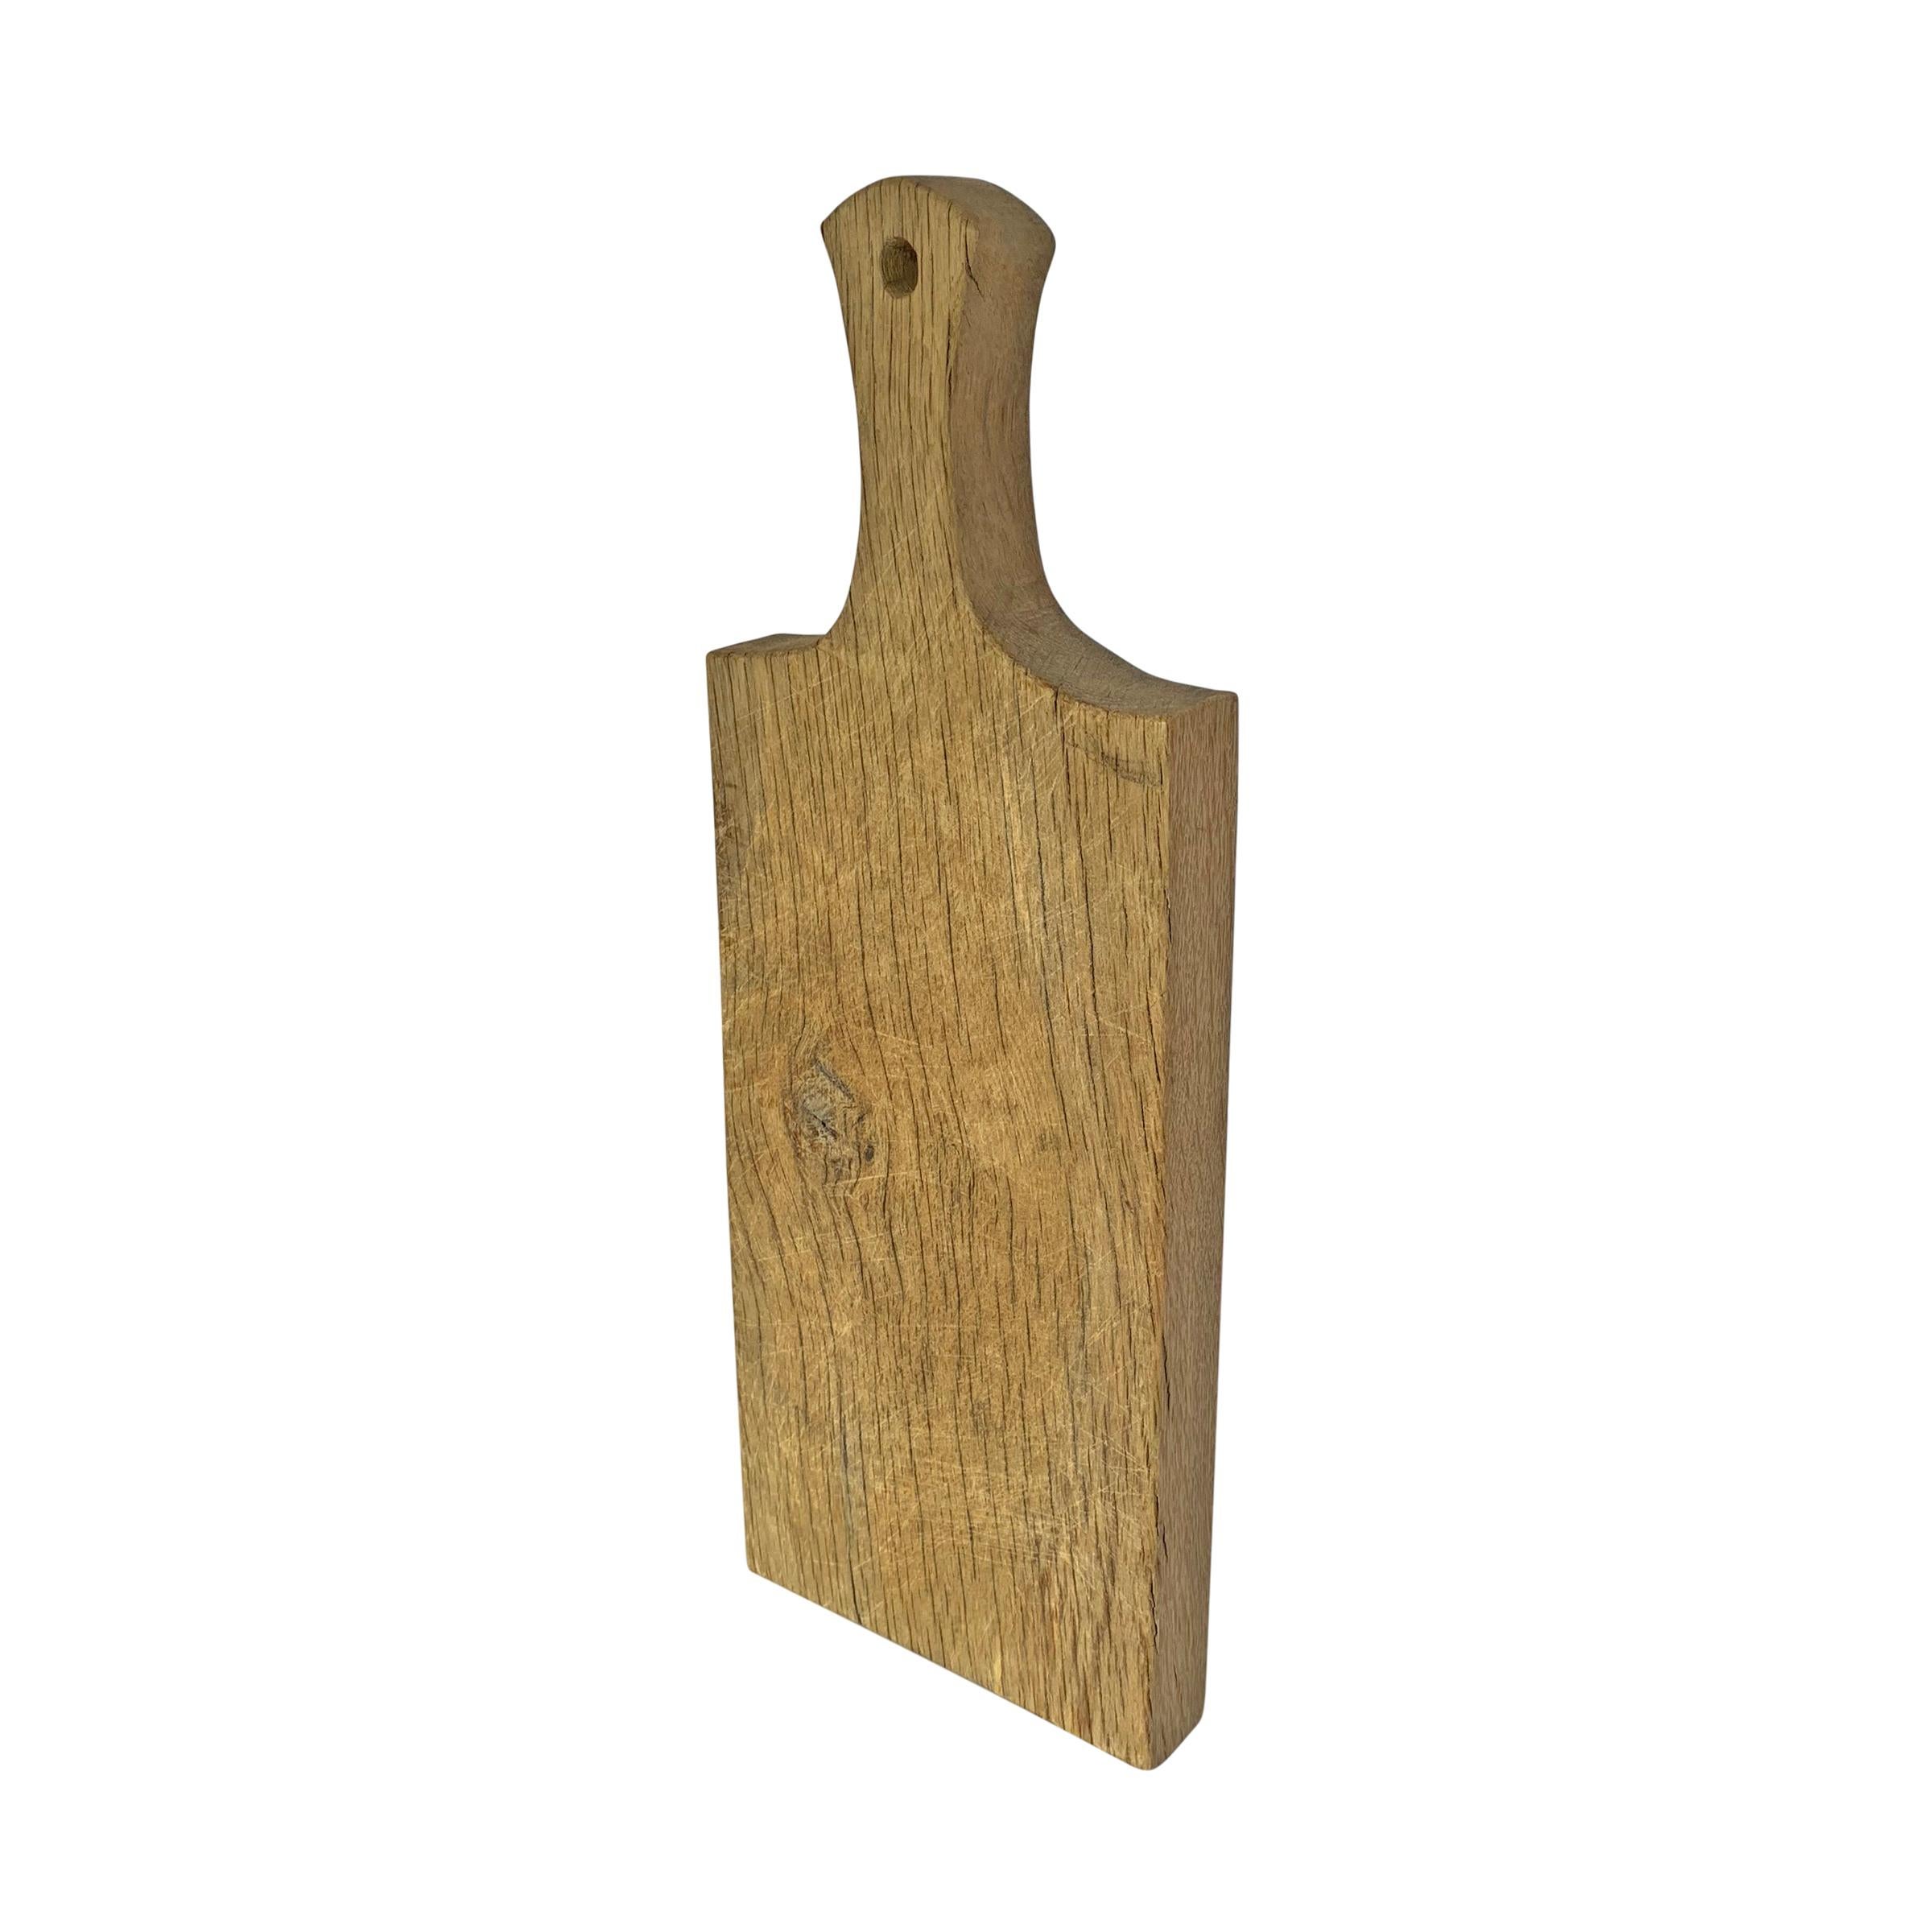 A late 19th century French oak cutting board with a sturdy demeanor, a wonderful golden color, and a hole for hanging. Perfect for charcuterie or cheese!